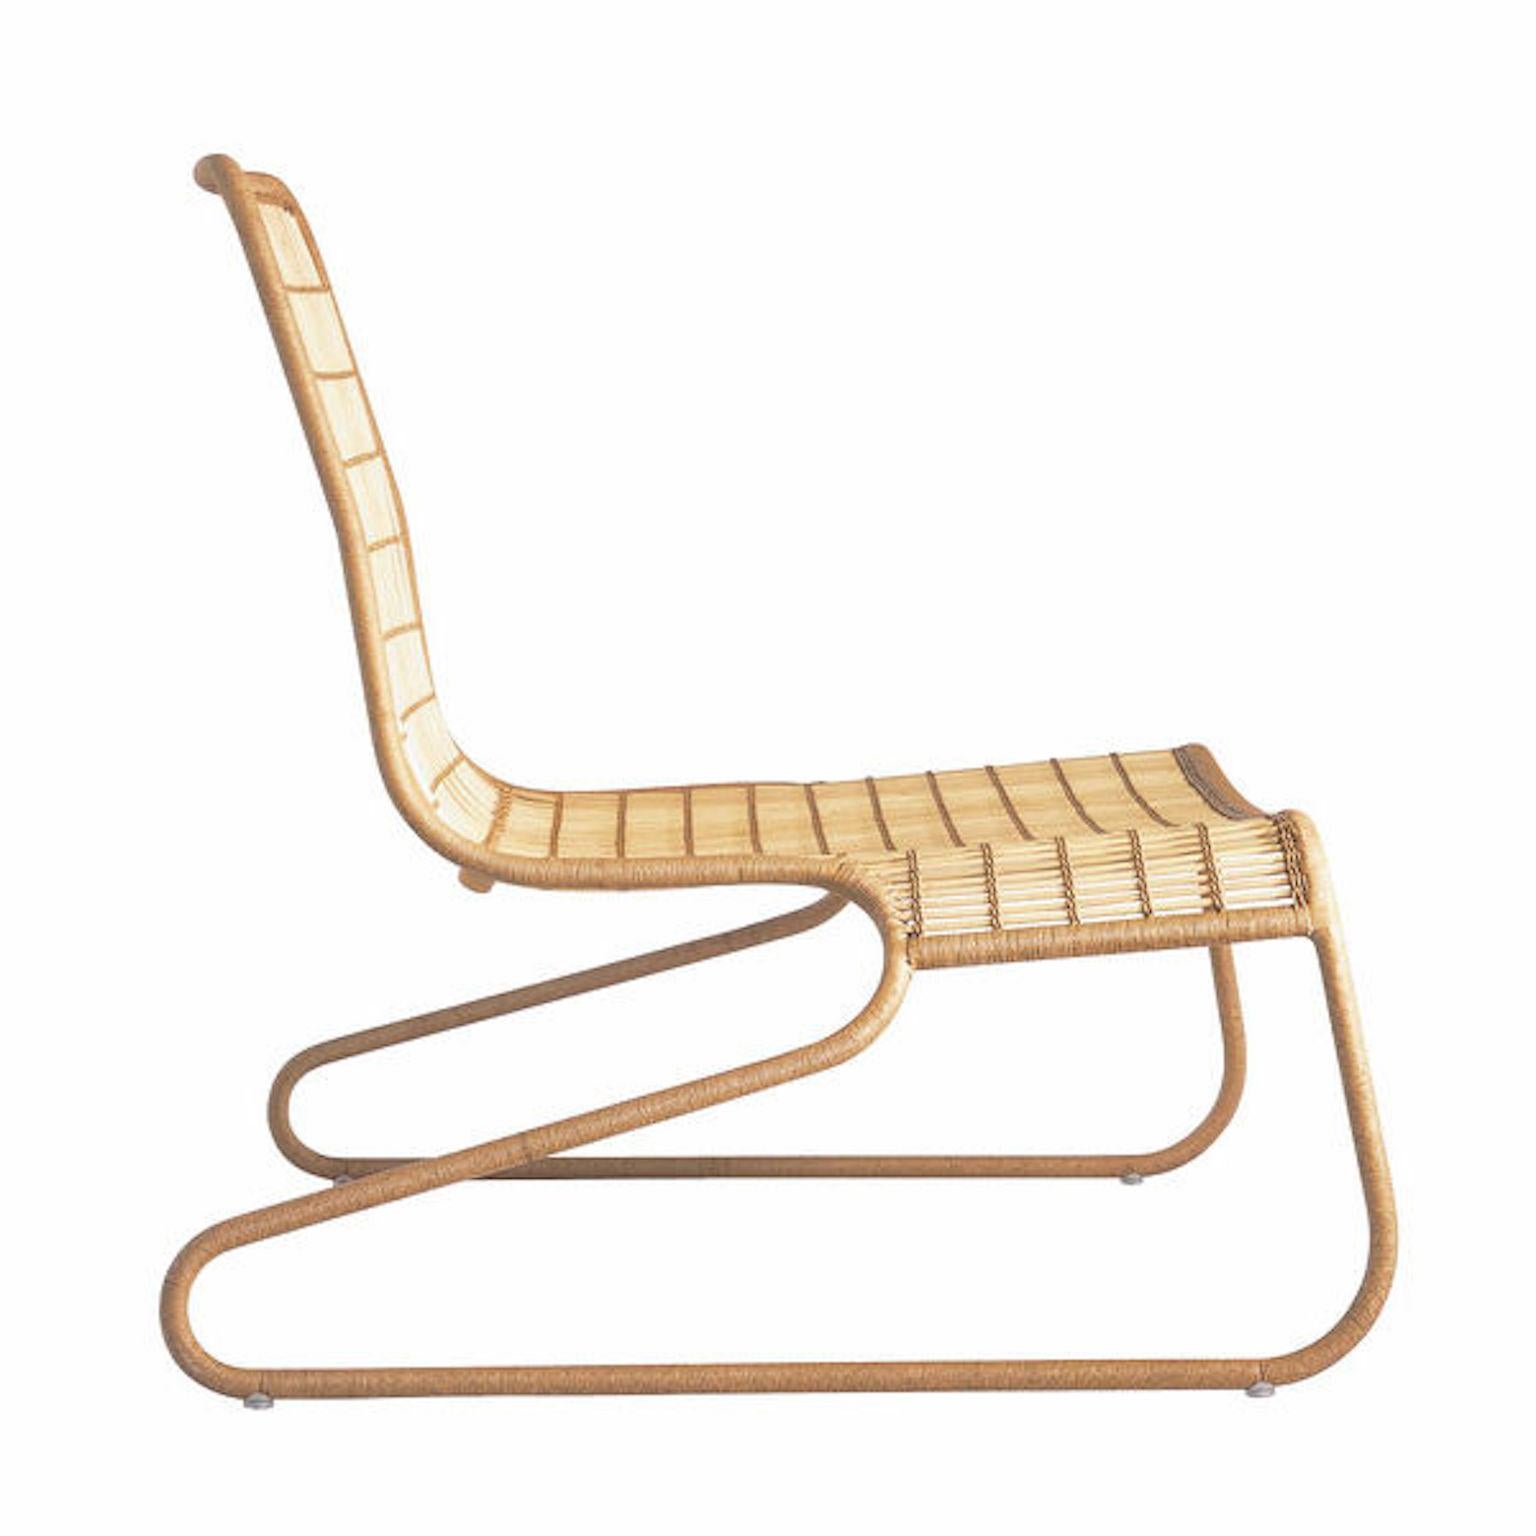 Flo armchair design by Patricia Urquiola for Driade with a painted steel structure covered in wicker in an 'aerial' version.
An armchair that recalls the classic shapes of the Eames but is characterized by the materials used. Ideal for any space.